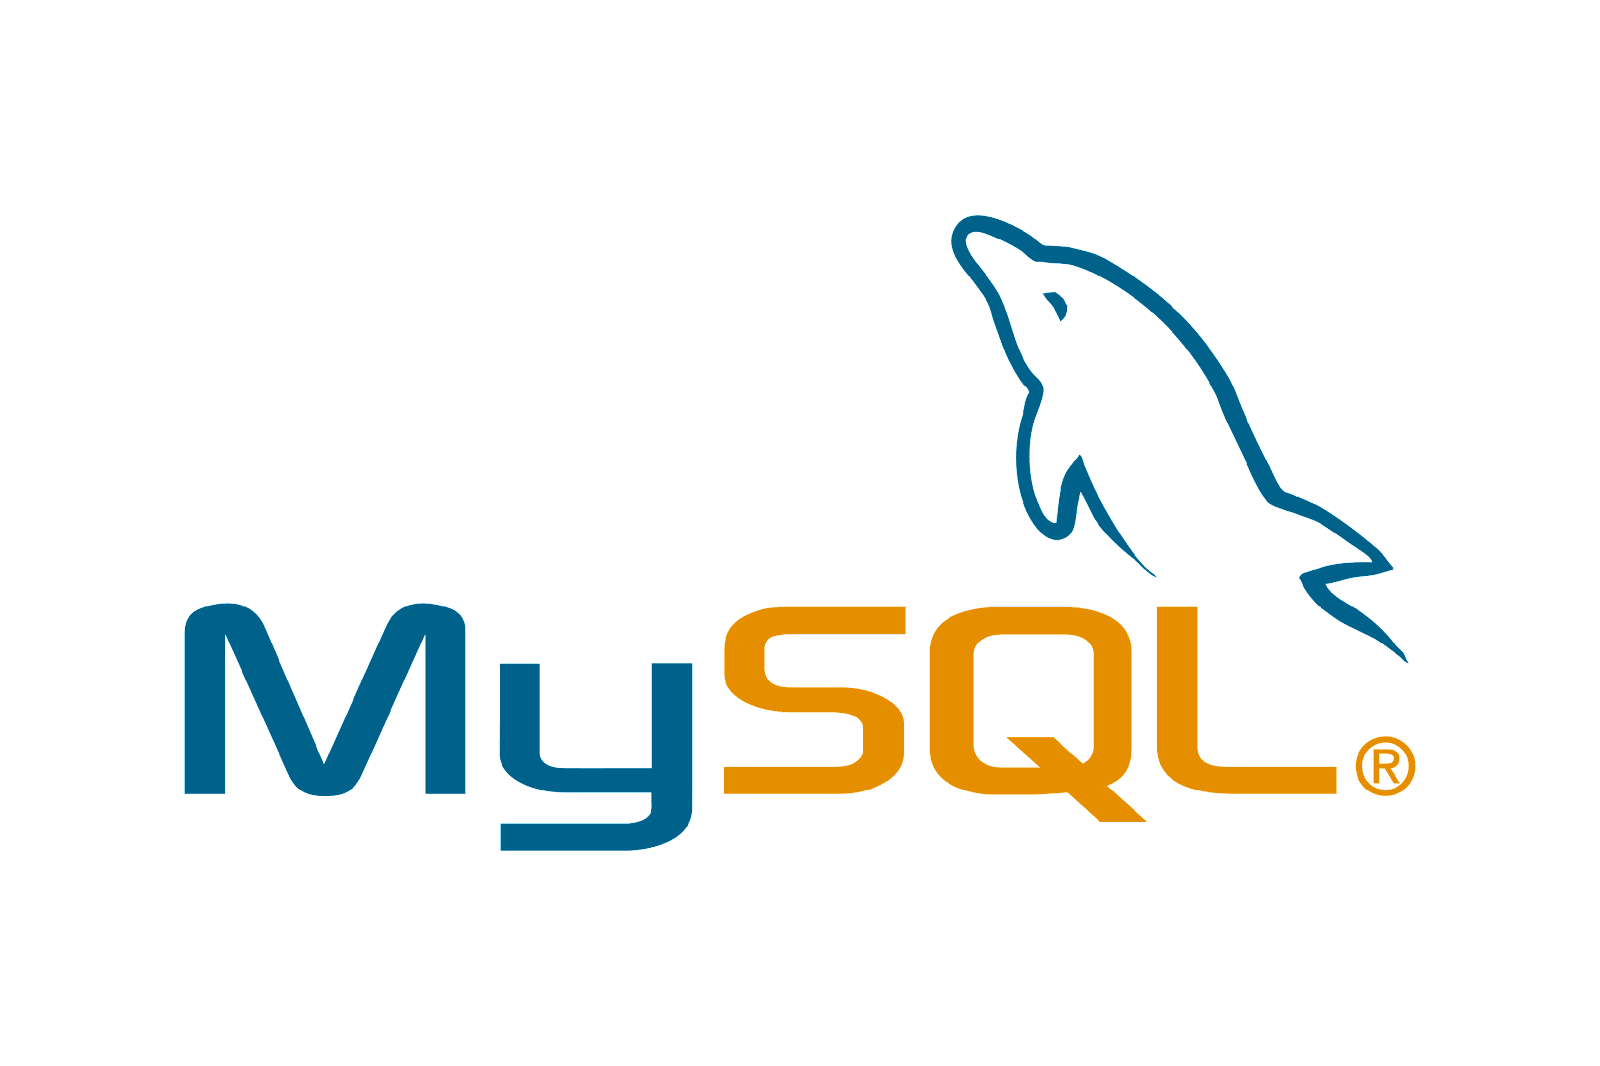 Top 7 Things About MySQL That You Need To Know To Get Better